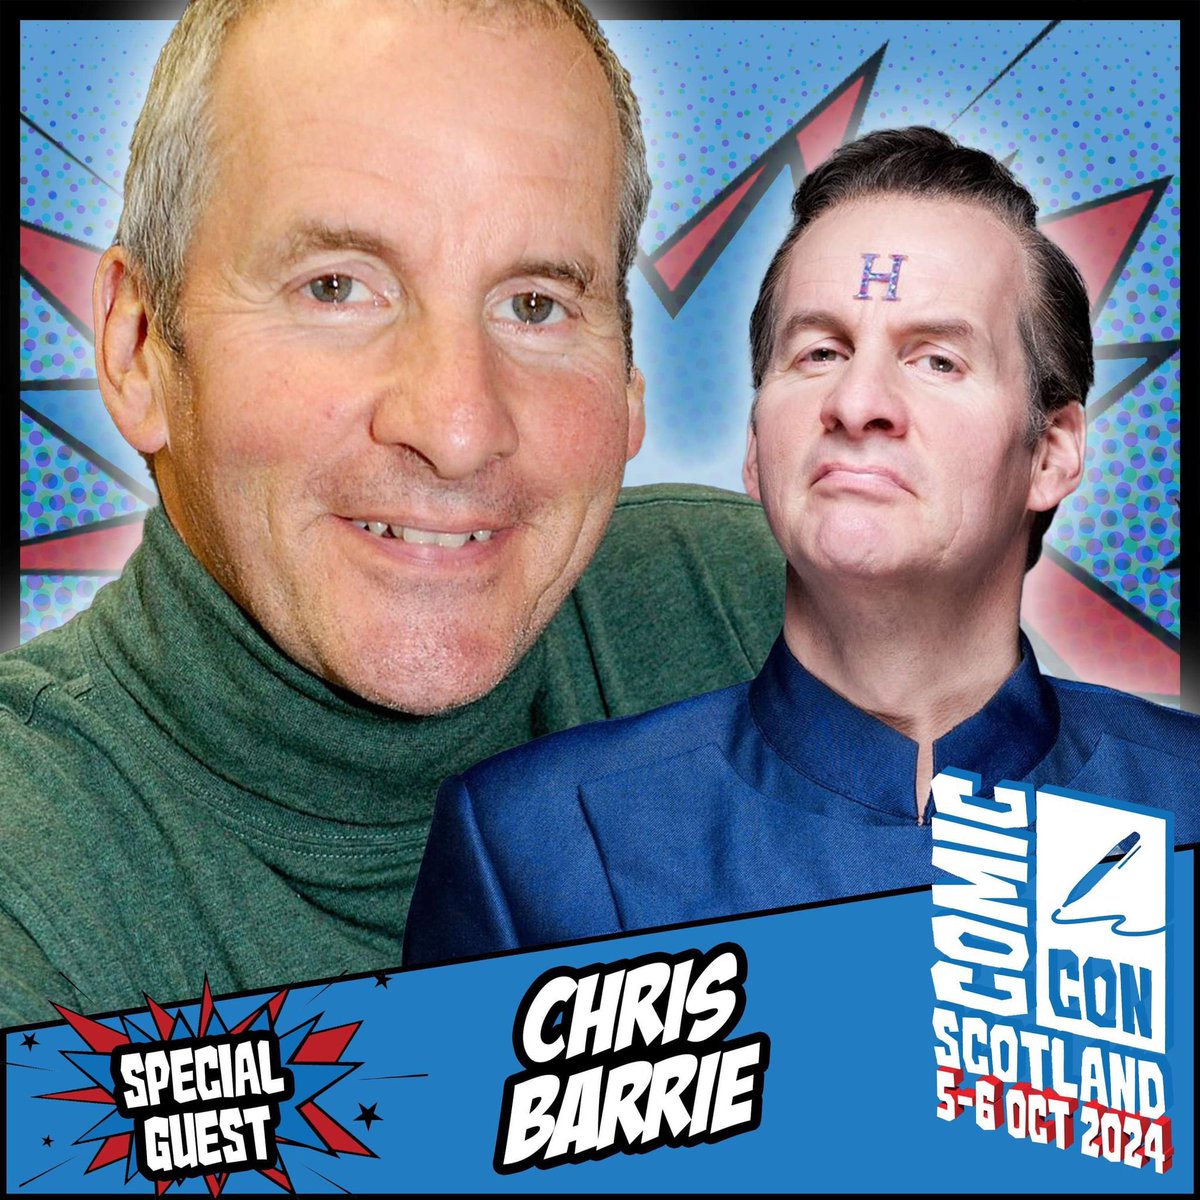 Comic Con Scotland welcomes Chris Barrie, known for projects such as Red Dwarf, Saving Santa, Lara Croft Tomb Raider: The Cradle of Life, and many more. Appearing 5-6 October! Tickets: comicconventionscotland.co.uk